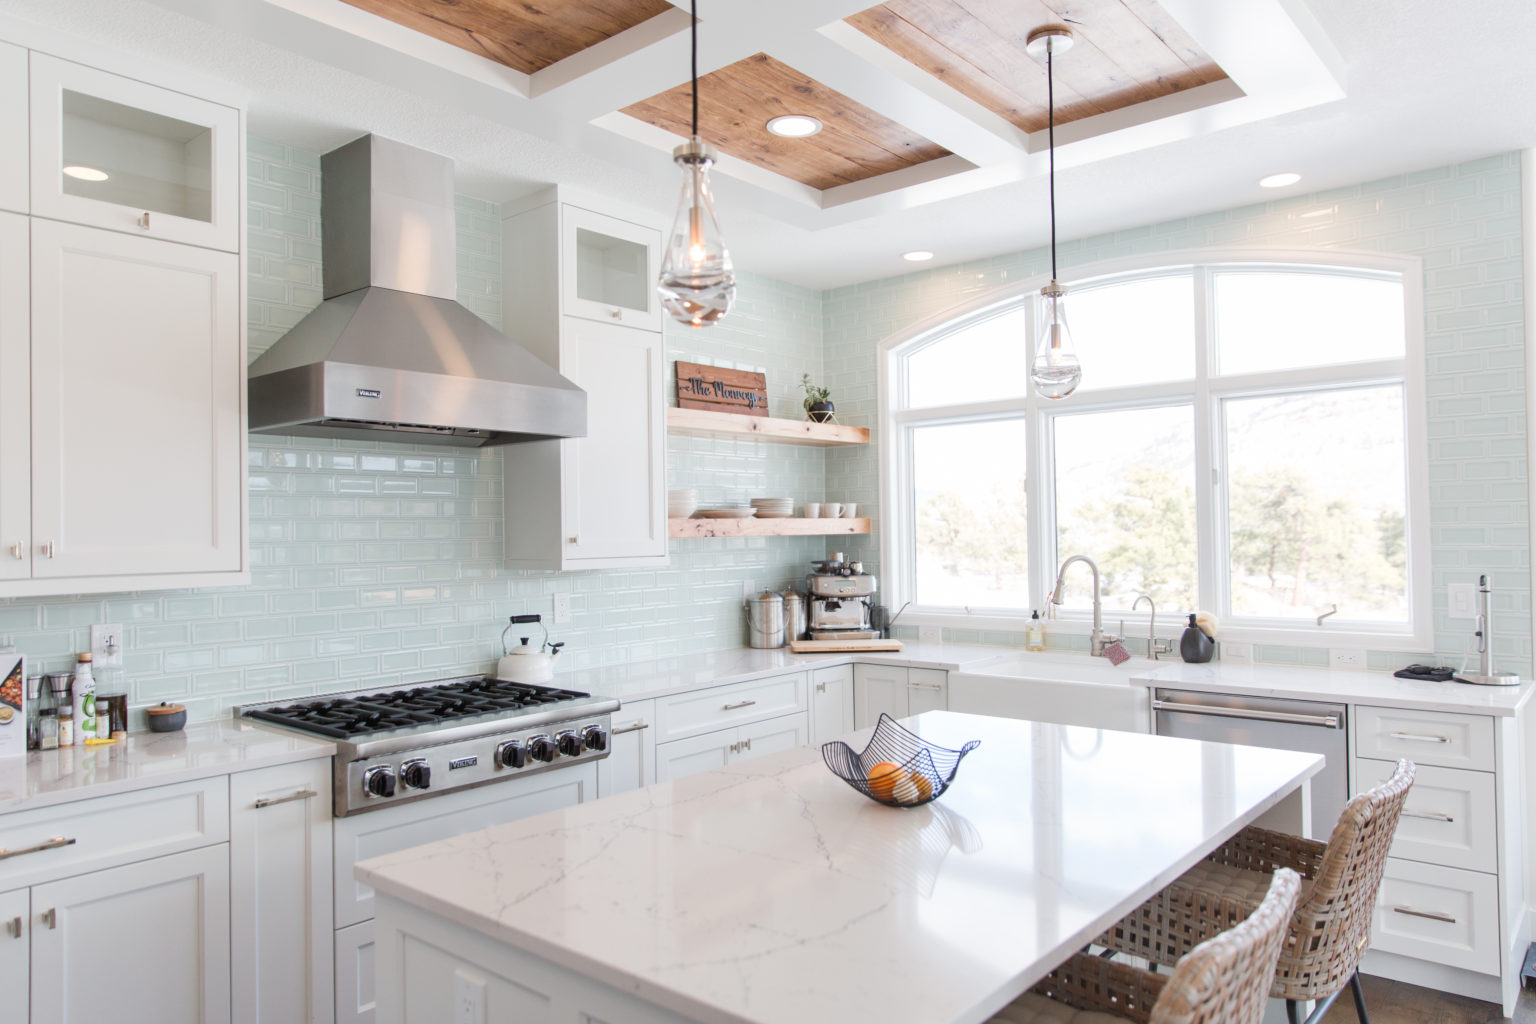 The view of a brightly lit, cool-toned renovated kitchen features a marble-topped kitchen island, new stove and hood, and windows looking out over local Colorado scenery.